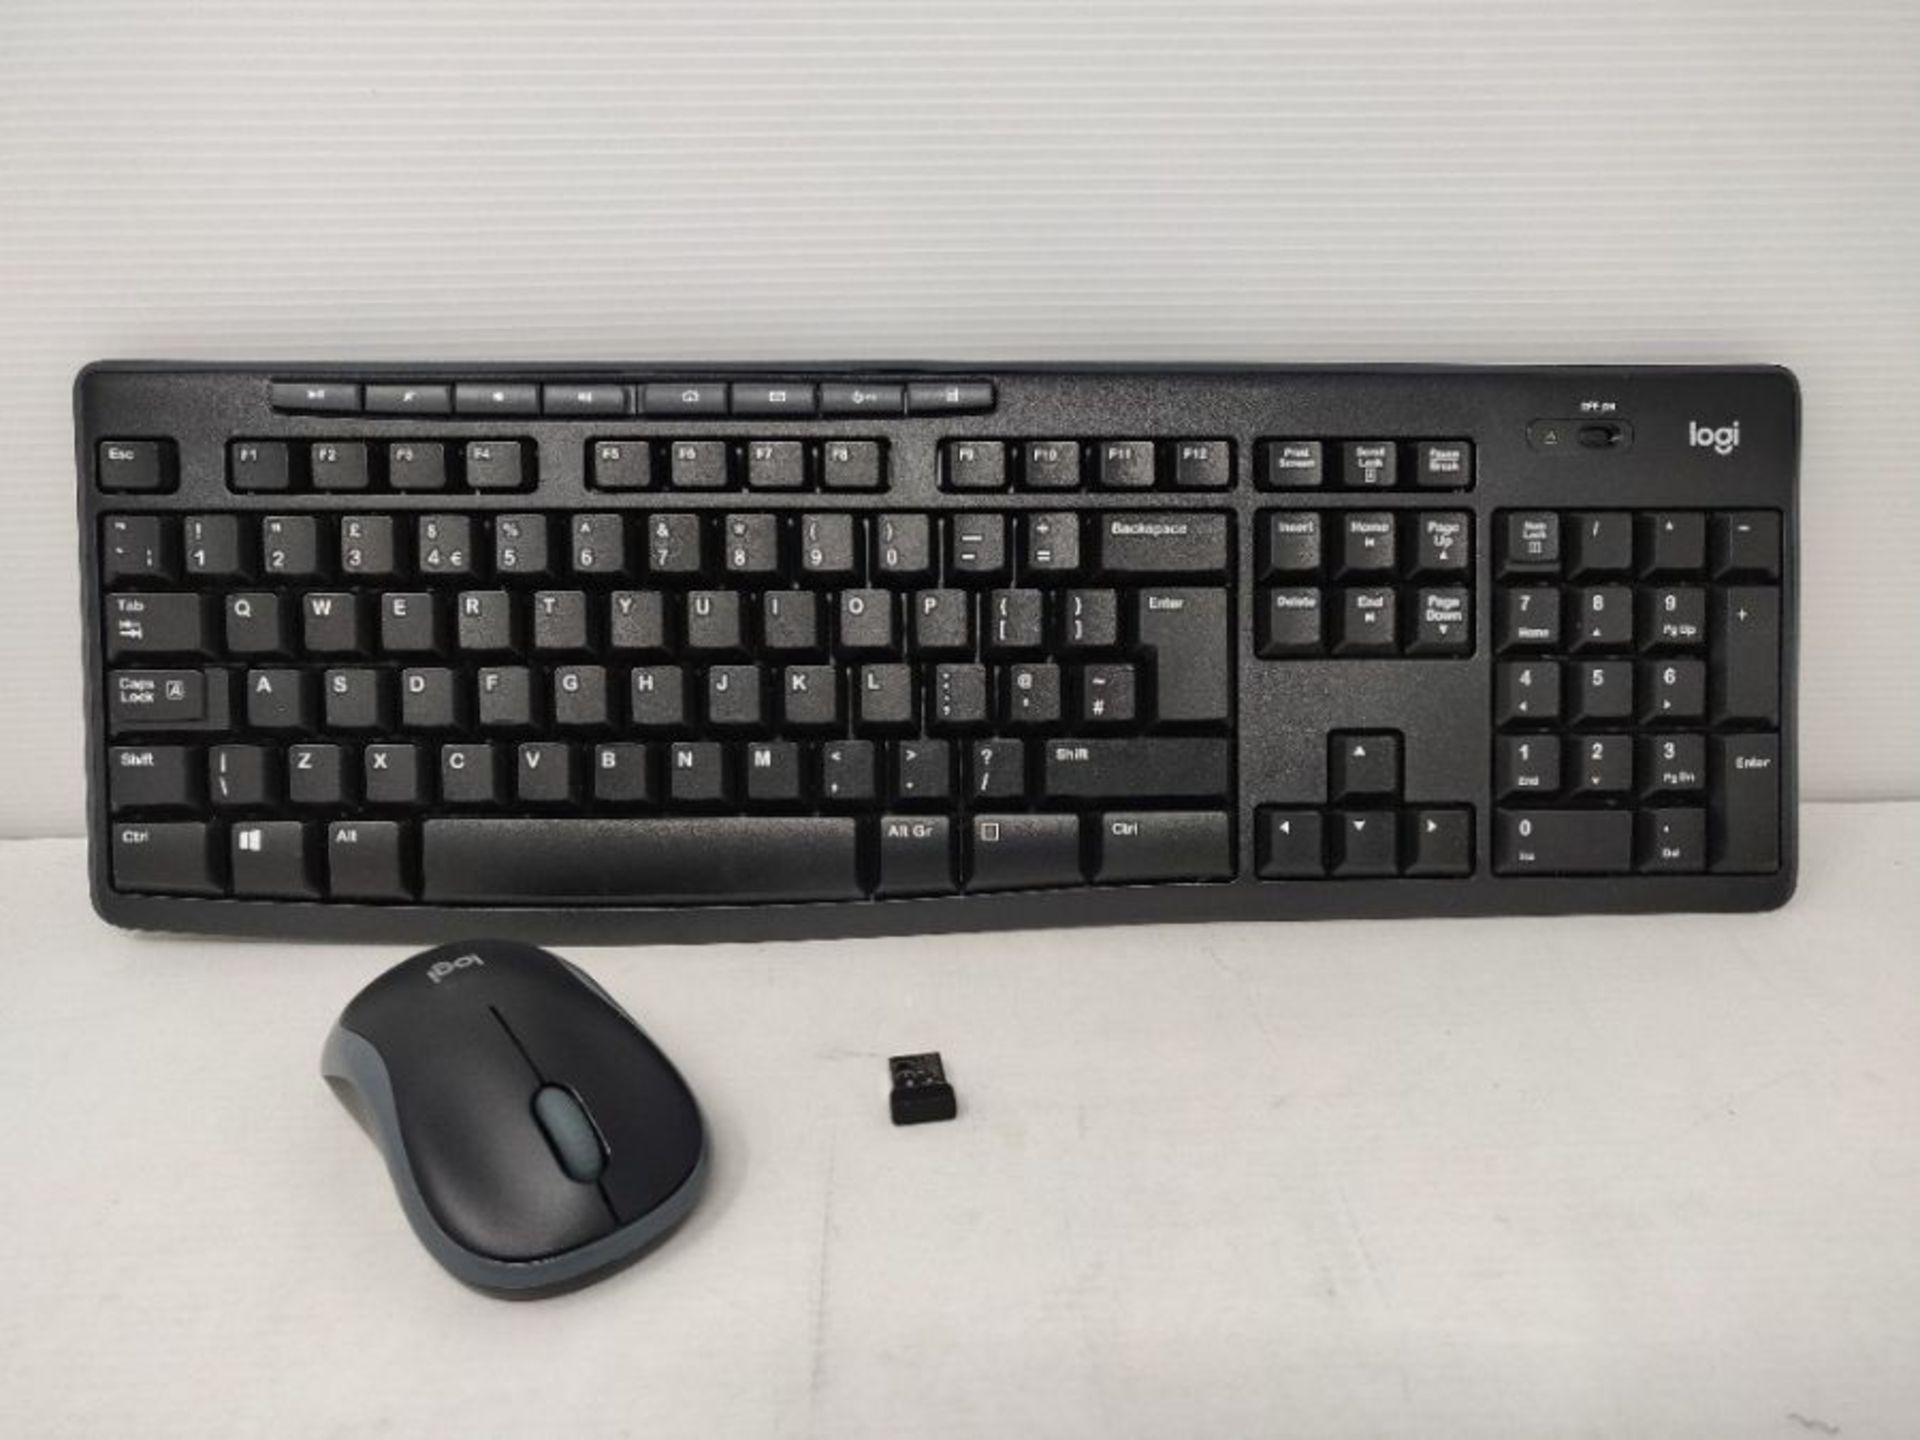 Logitech MK270 Wireless Keyboard and Mouse Combo for Windows, 2.4 GHz Wireless, Compac - Image 3 of 3